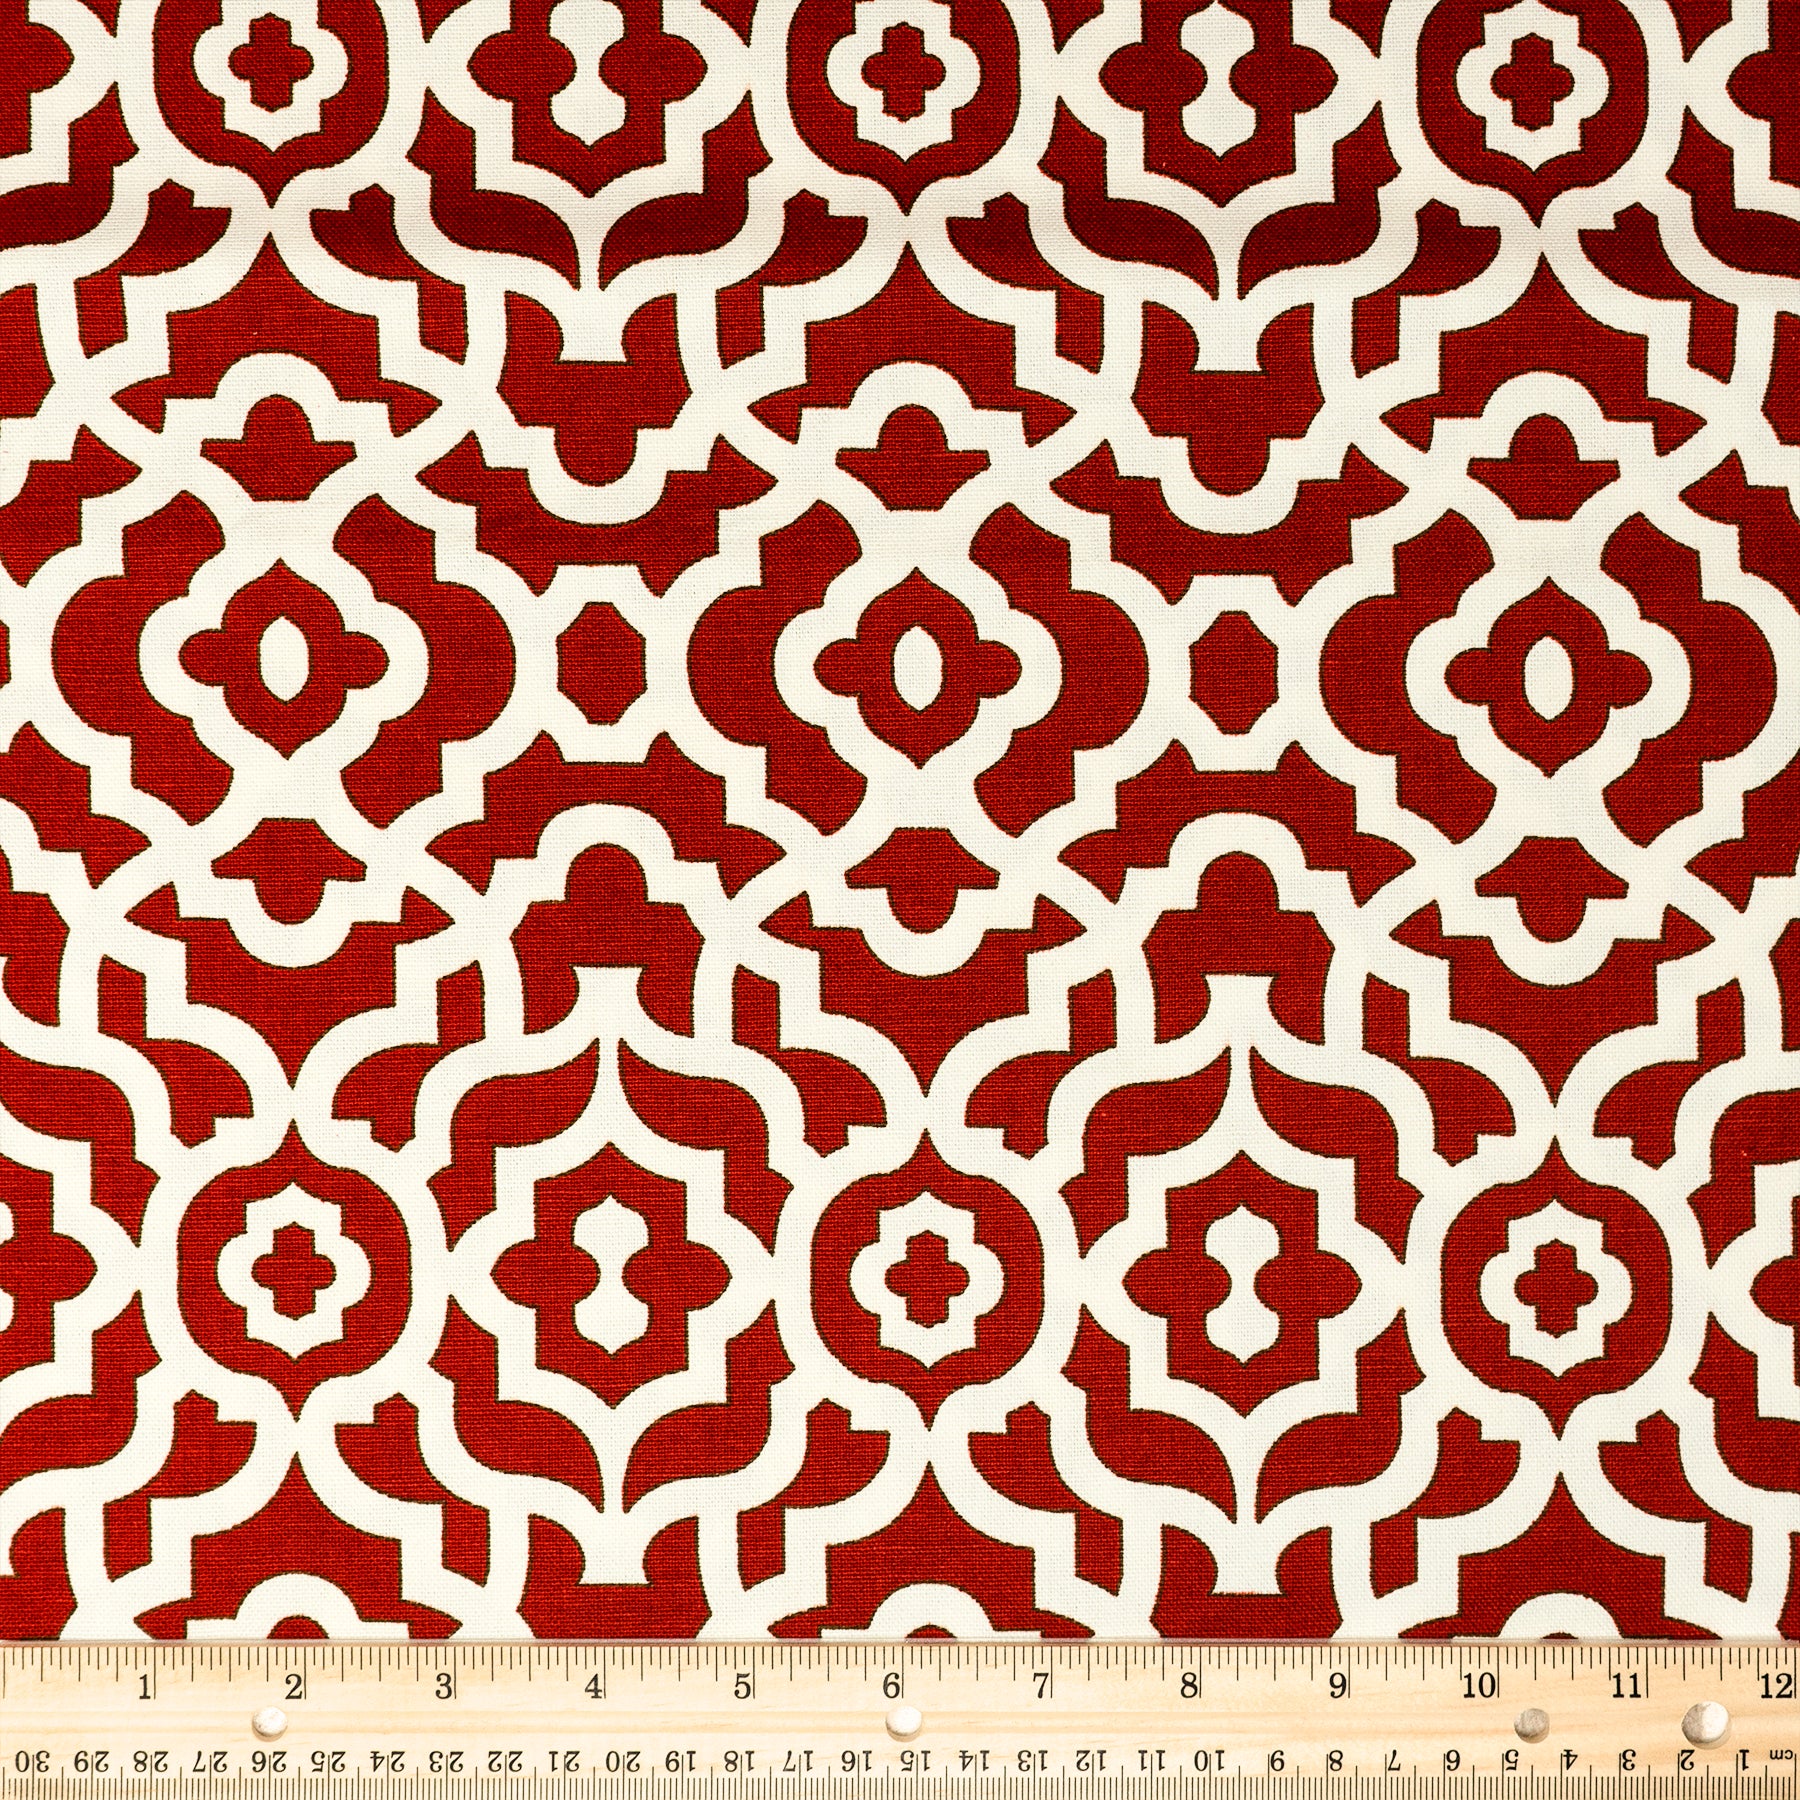 Waverly Inspirations 100% Cotton Duck 54" Lattice Red Color Sewing Fabric by the Yard